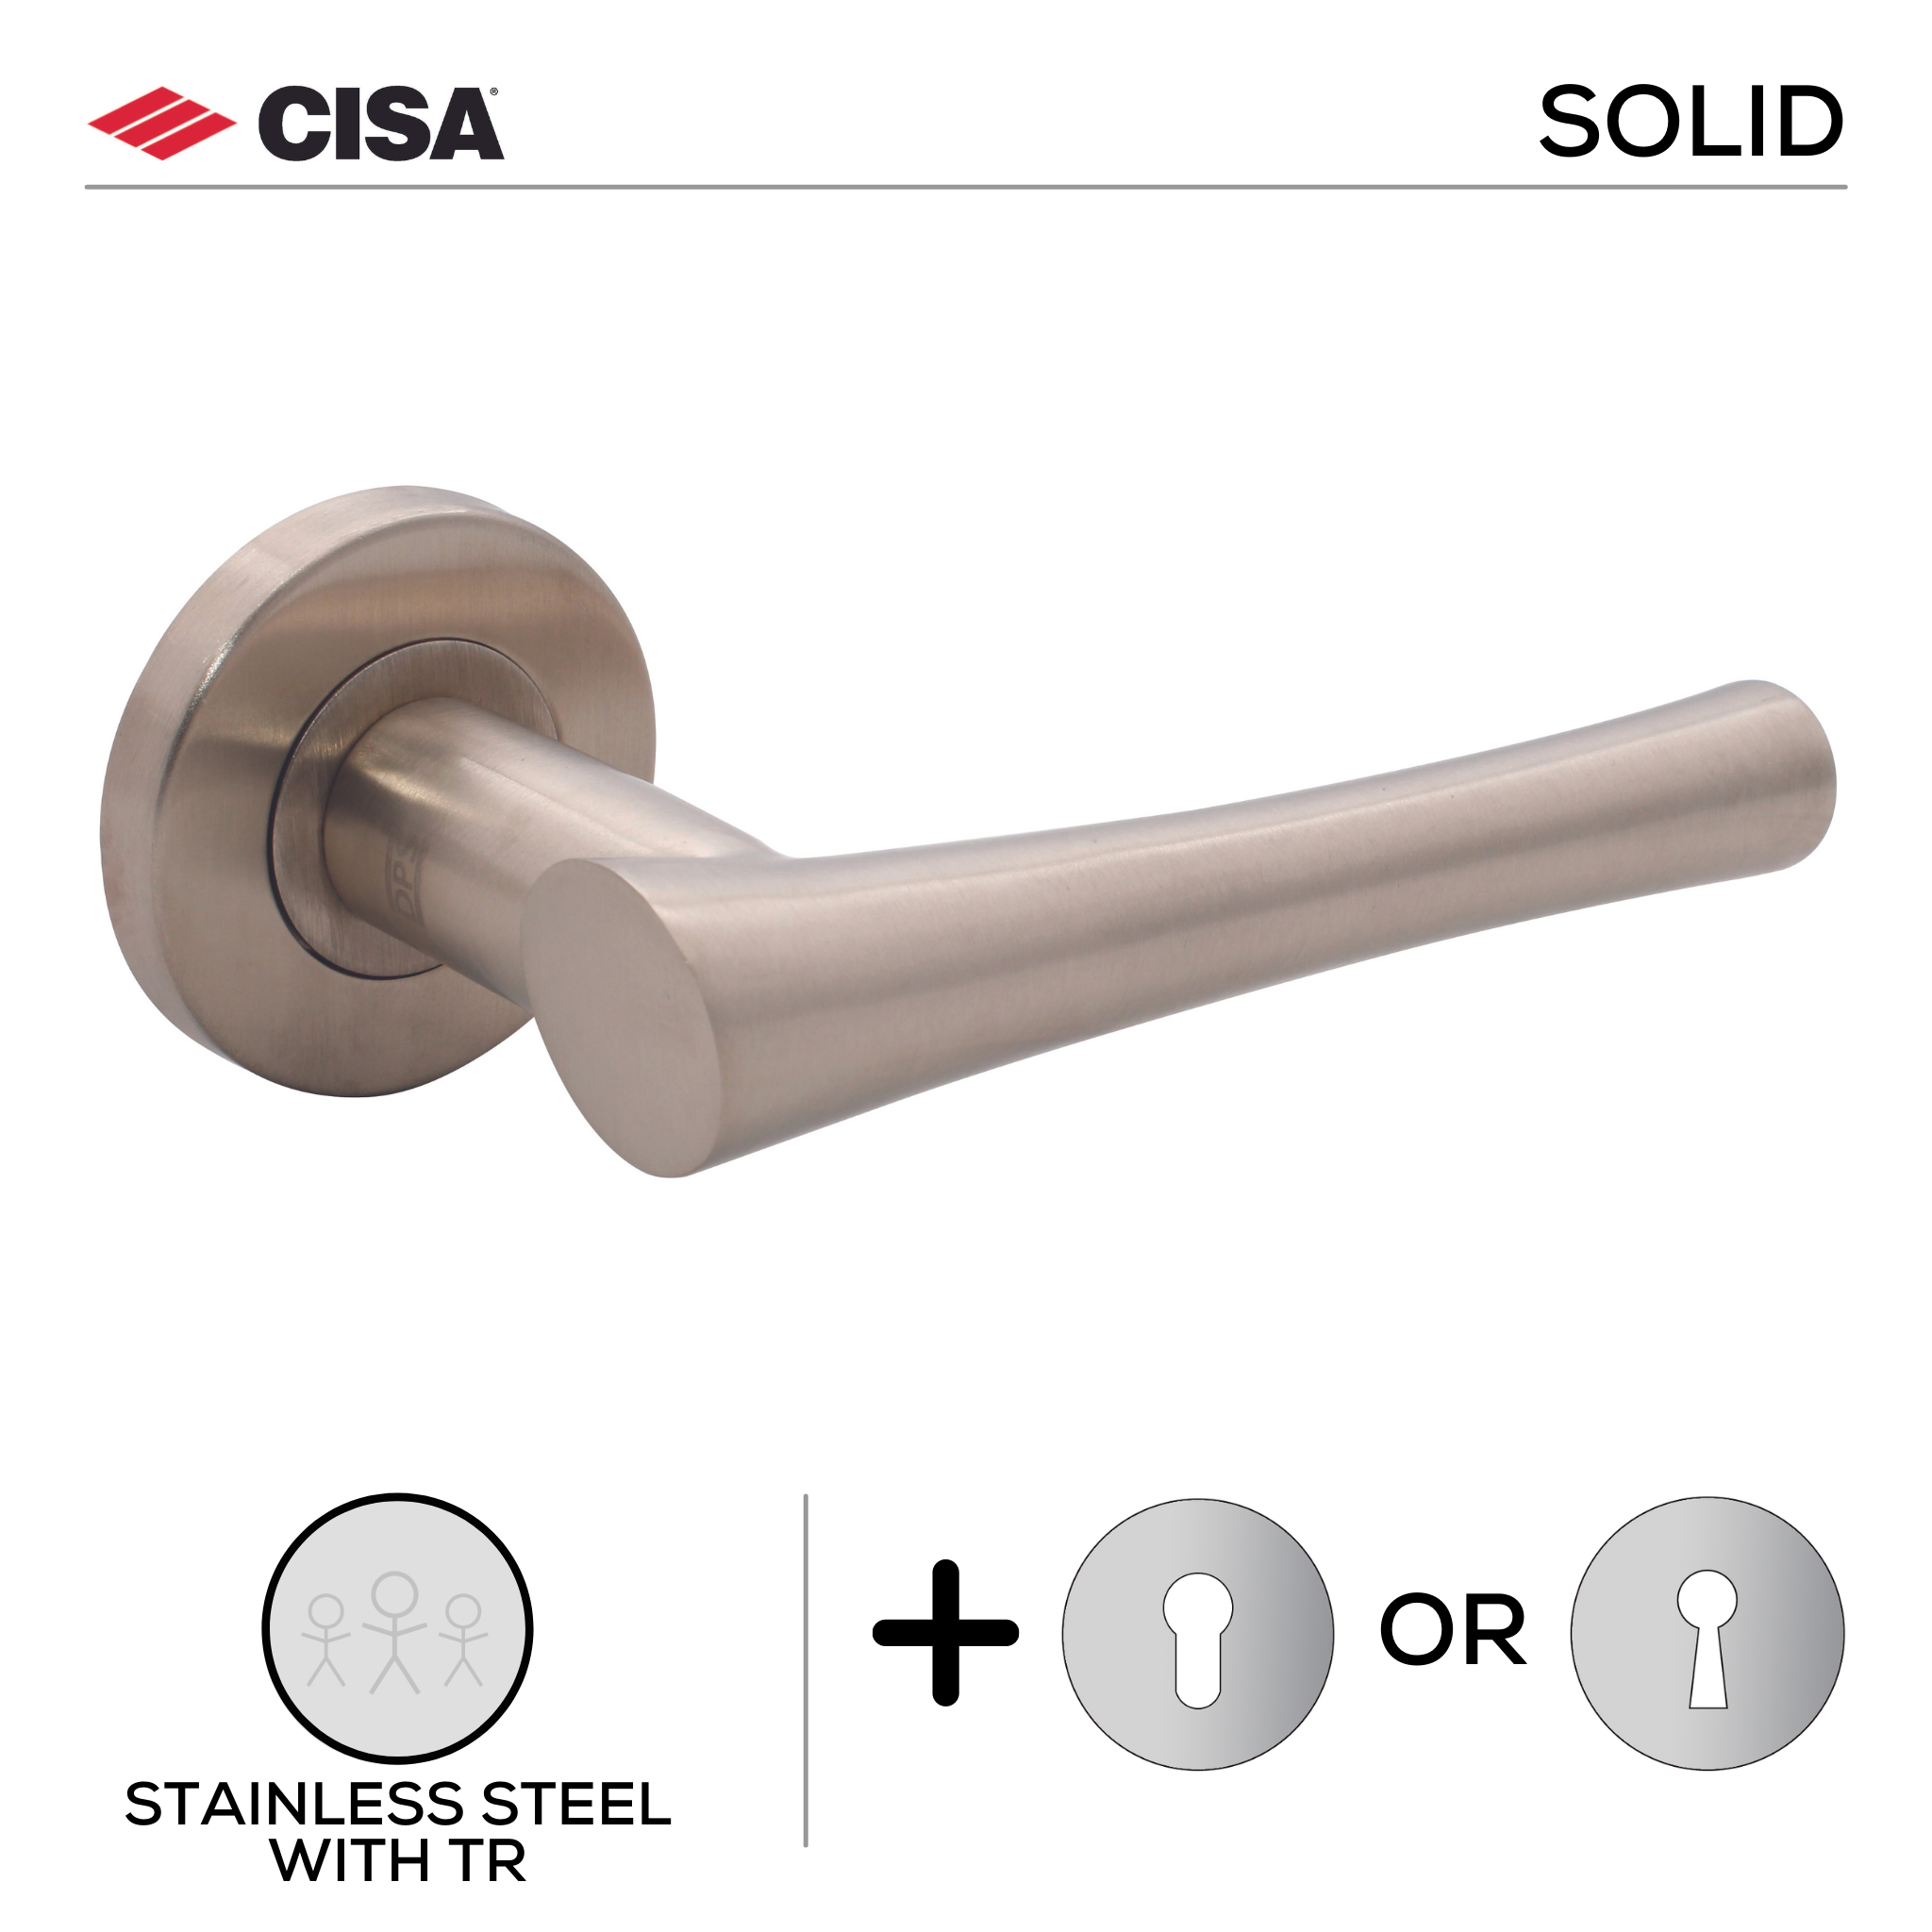 FS102.R._.TR, Lever Handles, Solid, On Round Rose, With Escutcheons, 138mm (l), Stainless Steel with Tarnish Resistant, CISA